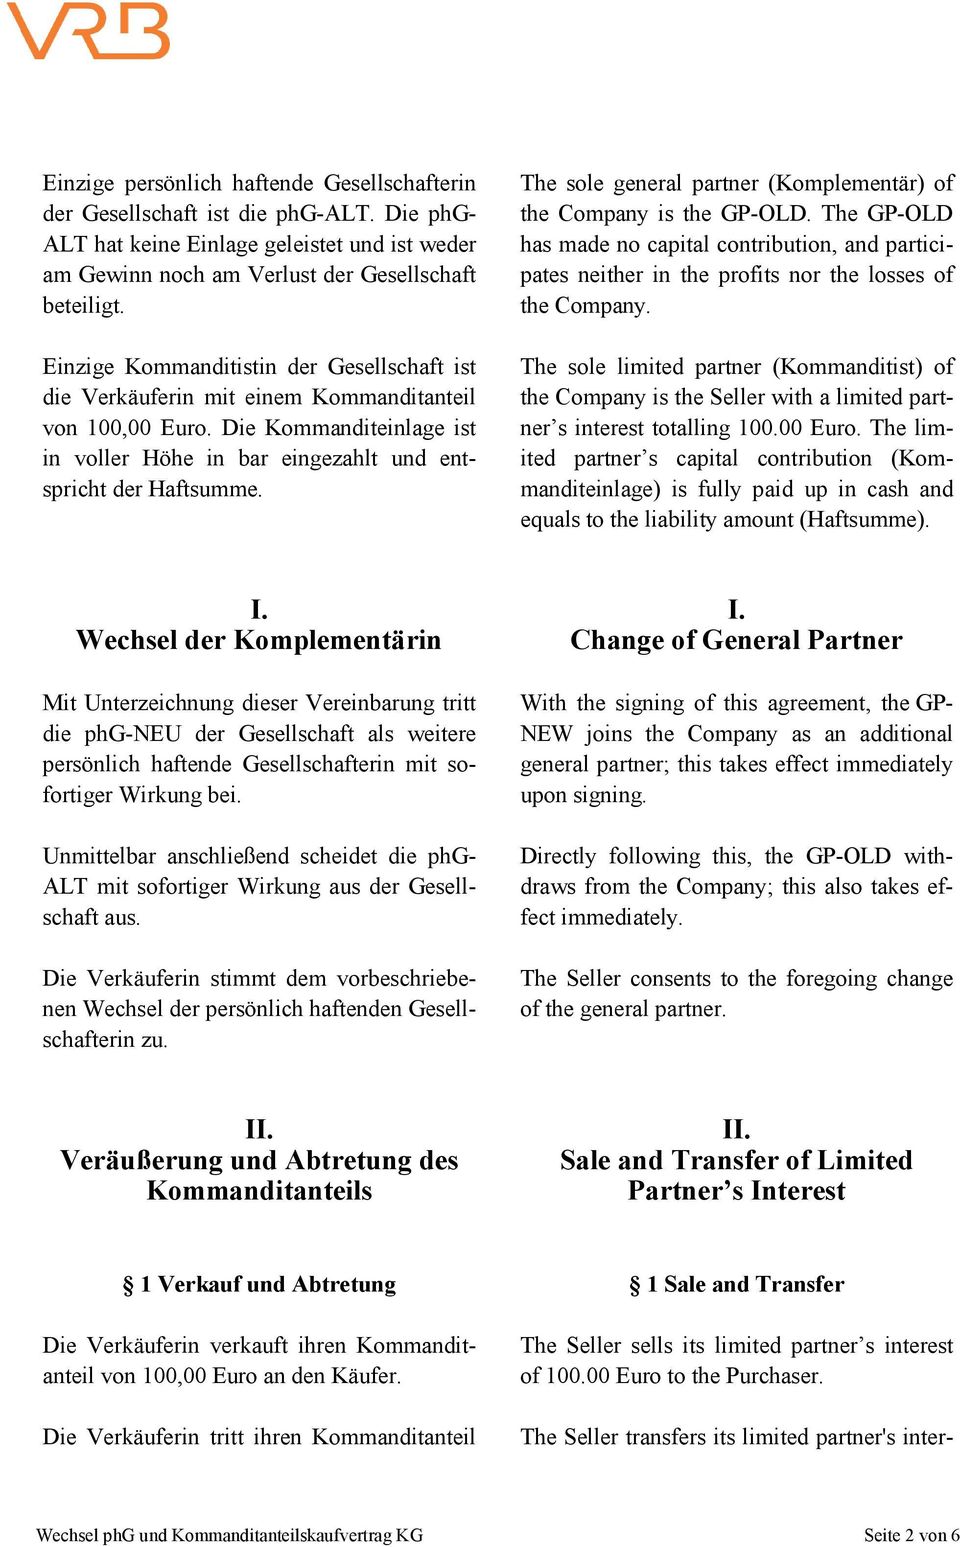 The sole general partner (Komplementär) of the Company is the GP-OLD. The GP-OLD has made no capital contribution, and participates neither in the profits nor the losses of the Company.